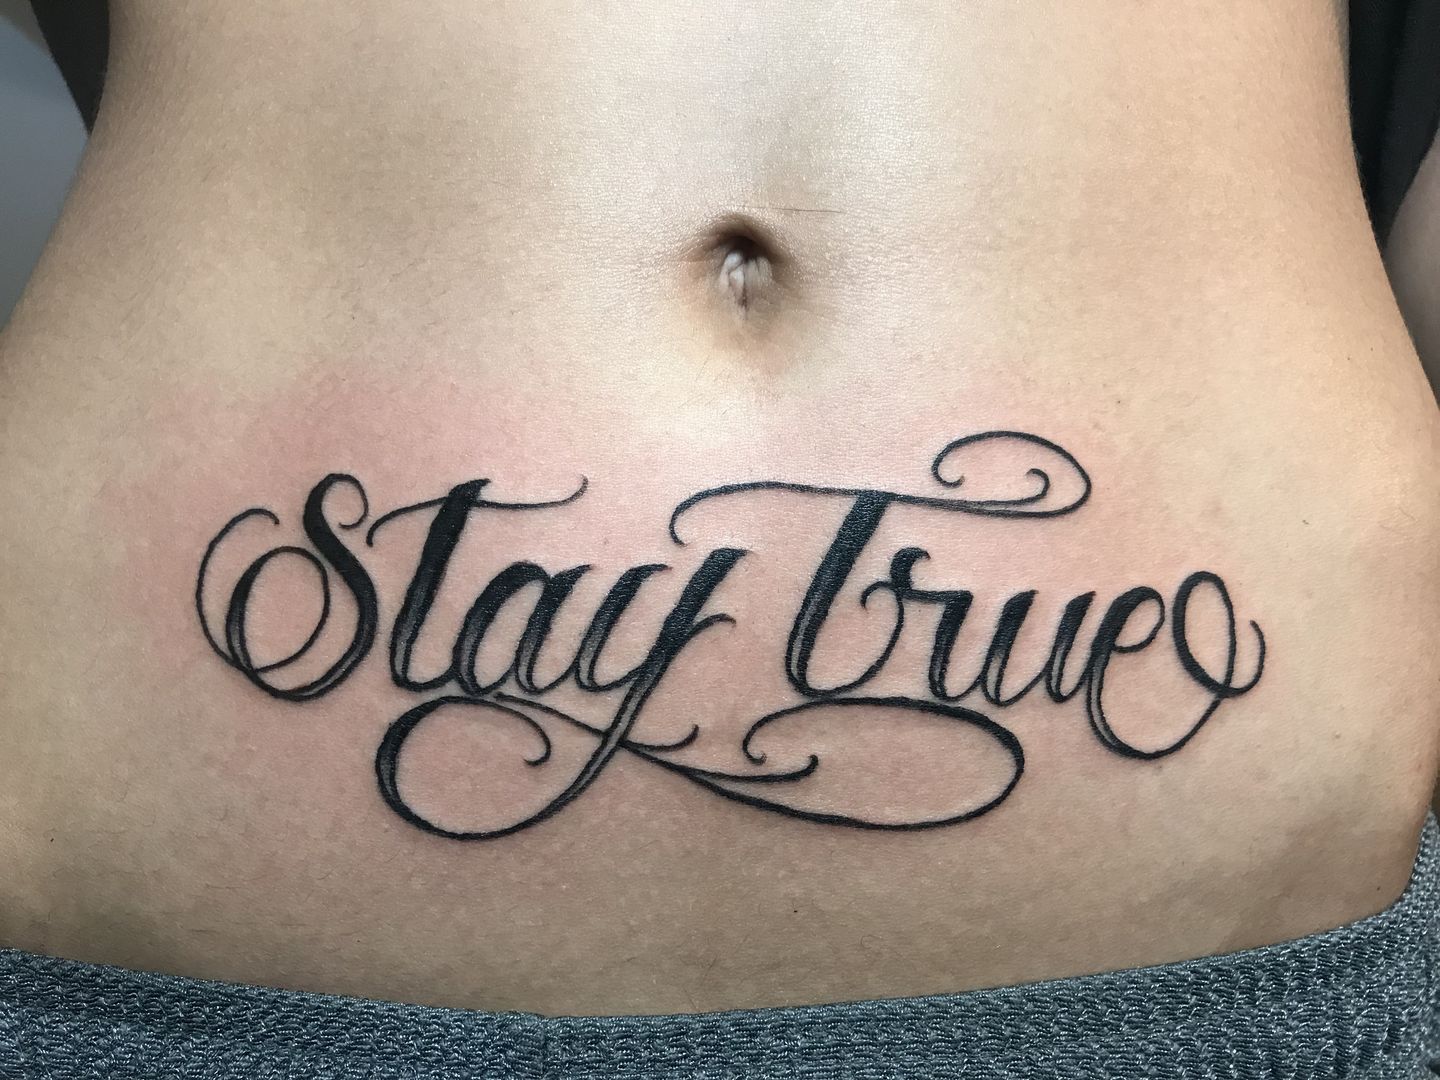 Caleb will always be reminded to stay true  Dollys Skin Art Tattoo  Kamloops BC